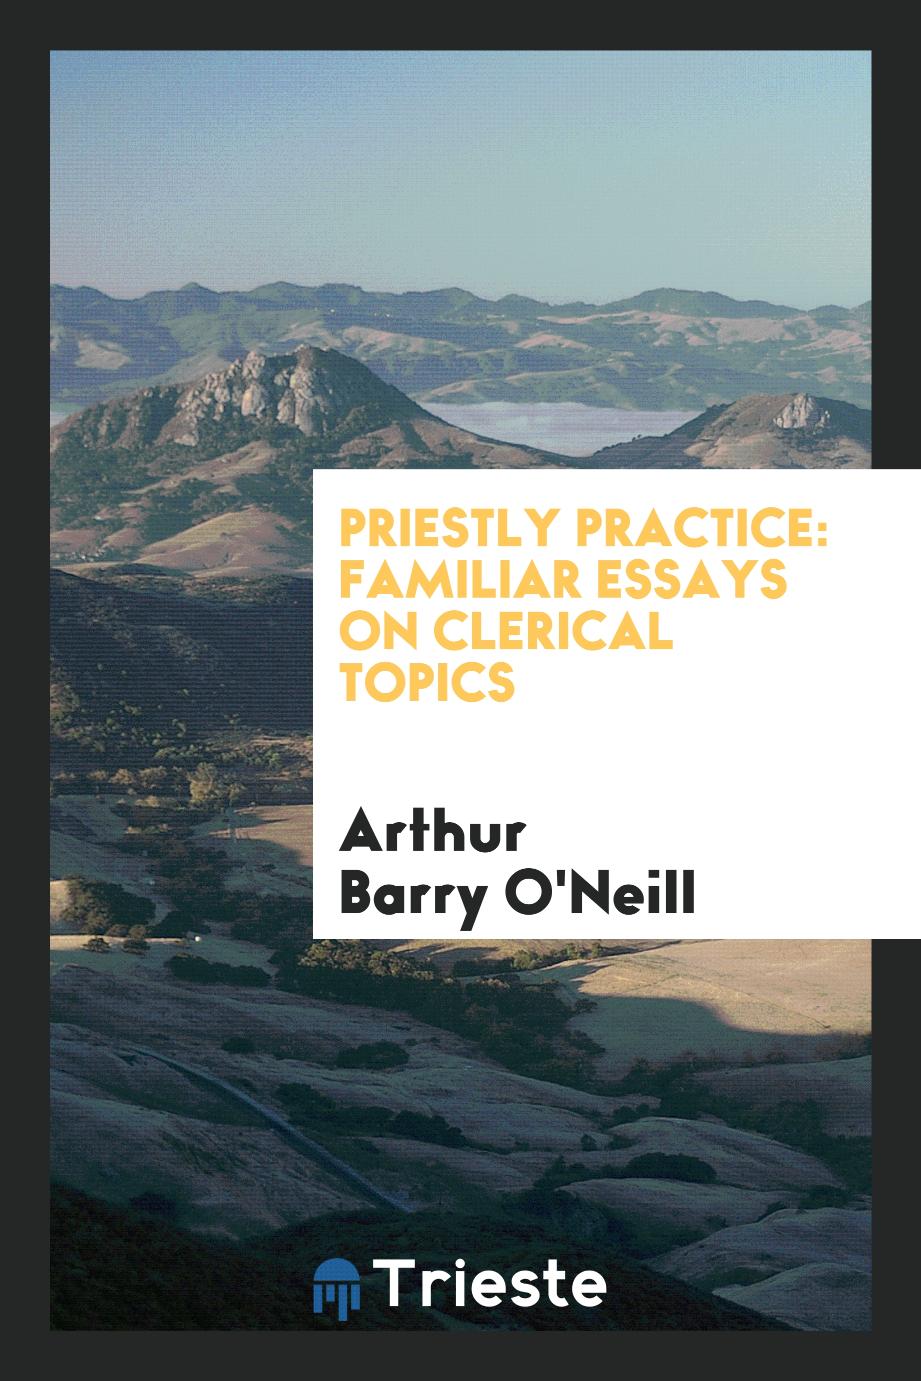 Priestly practice: familiar essays on clerical topics